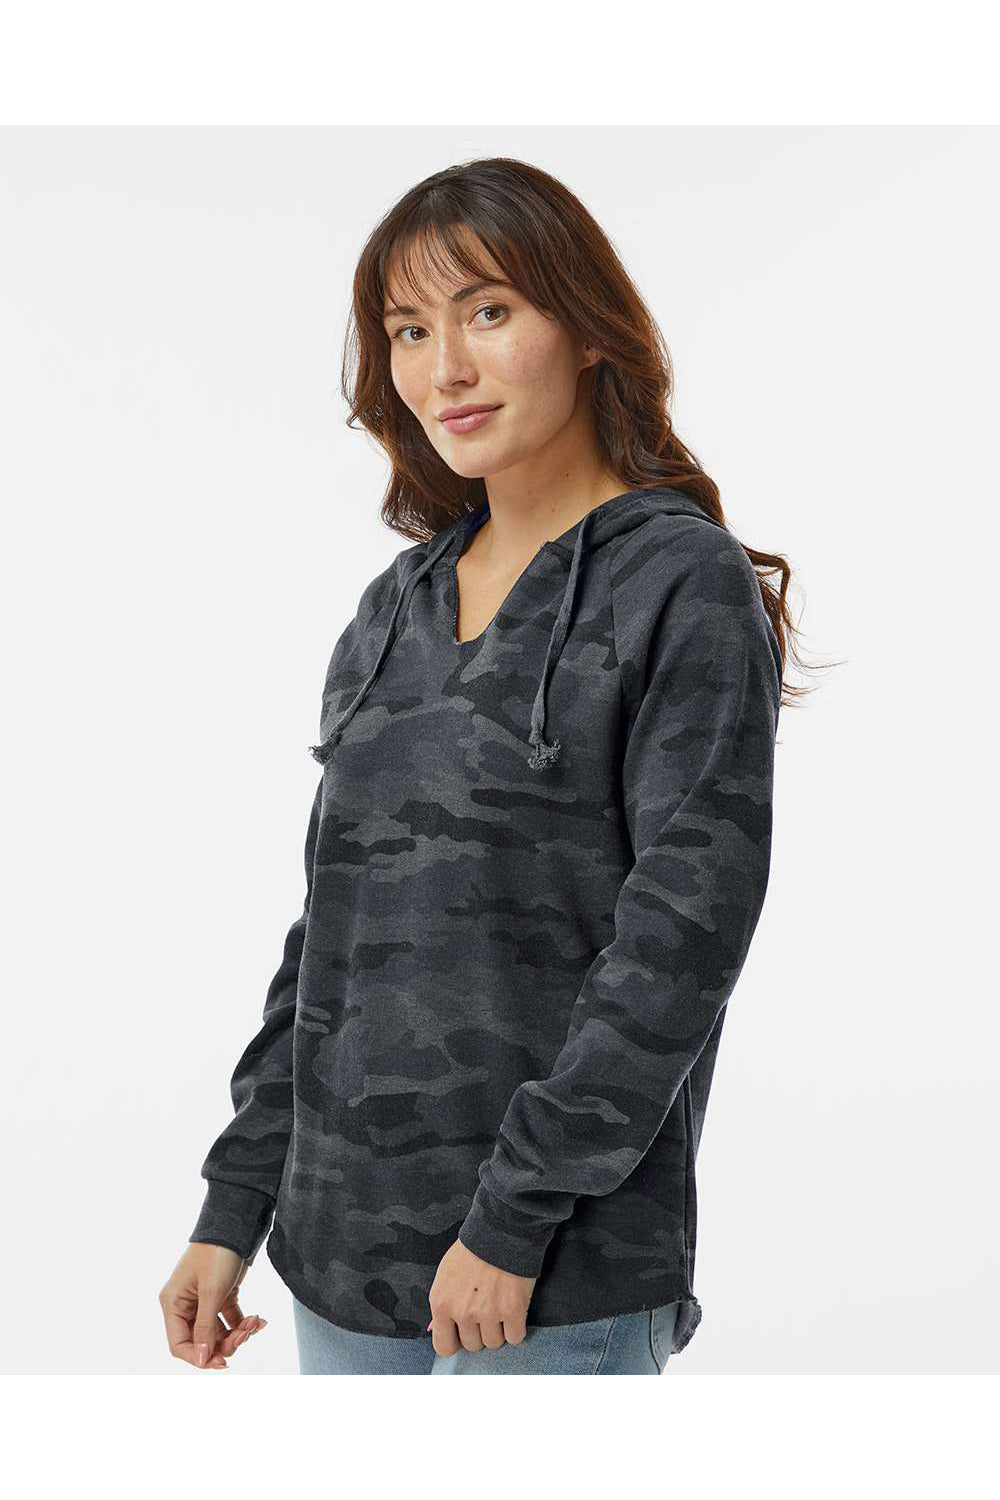 Independent Trading Co. PRM2500 Womens California Wave Wash Hooded Sweatshirt Hoodie Heather Black Camo Model Side